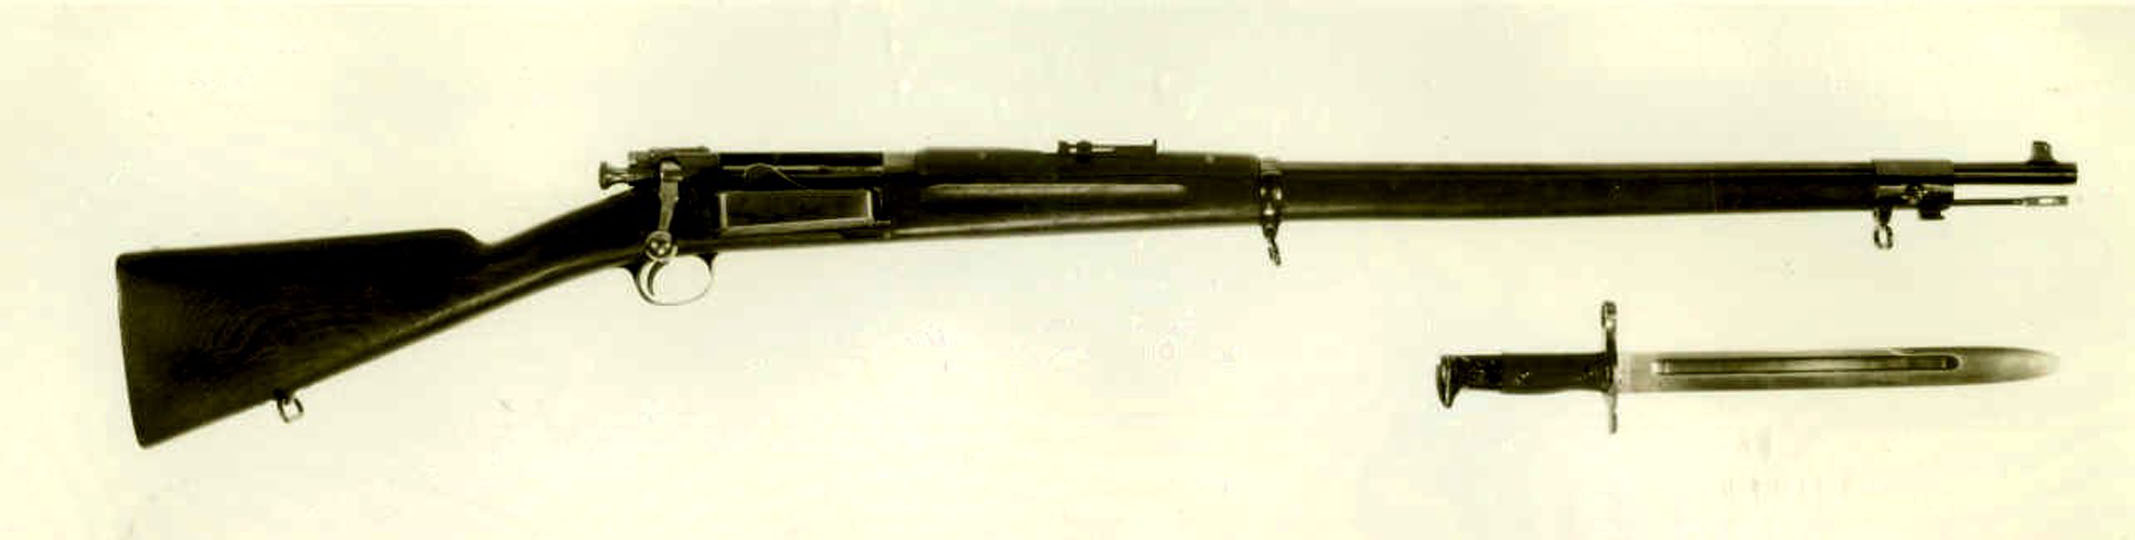 Krag Rifle with Bayonette Attachment